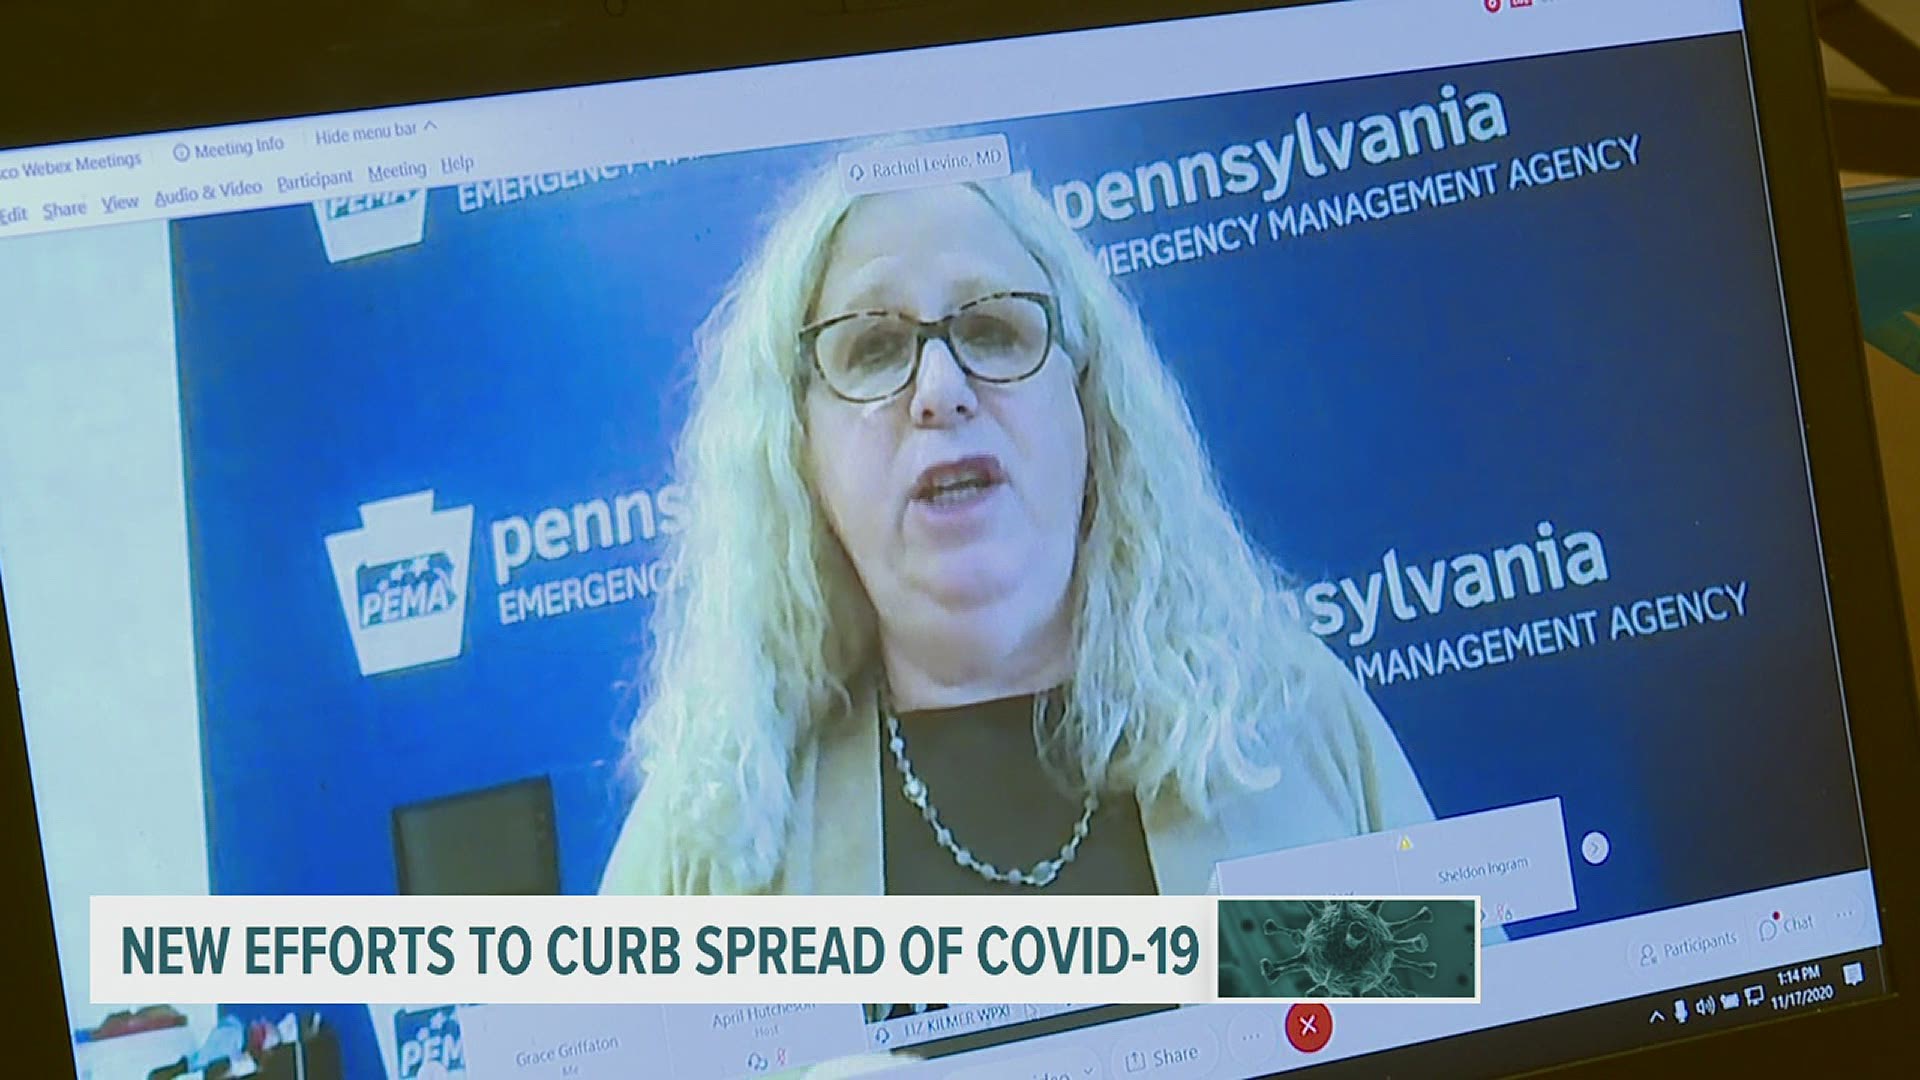 Dr. Rachel Levine announced “targeted efforts to control the spread of COVID-19 in Pennsylvania," including strengthened mask orders and new test requirements.